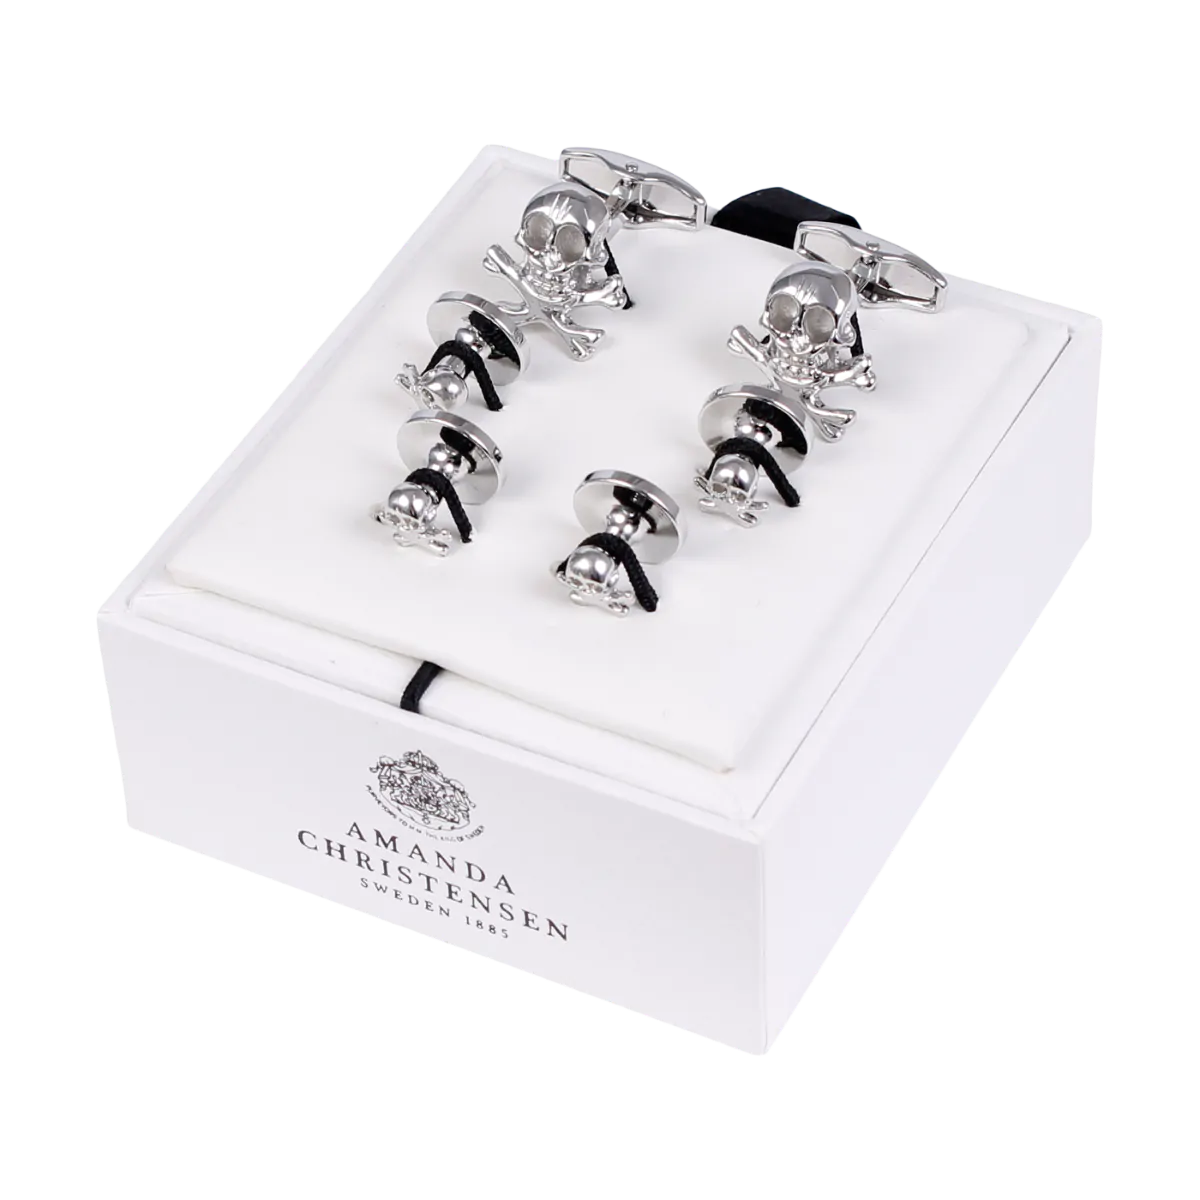 Skull & Crossbones Silver-Plated Solid Brass Cufflinks and Studs Set by House of Amanda Christensen